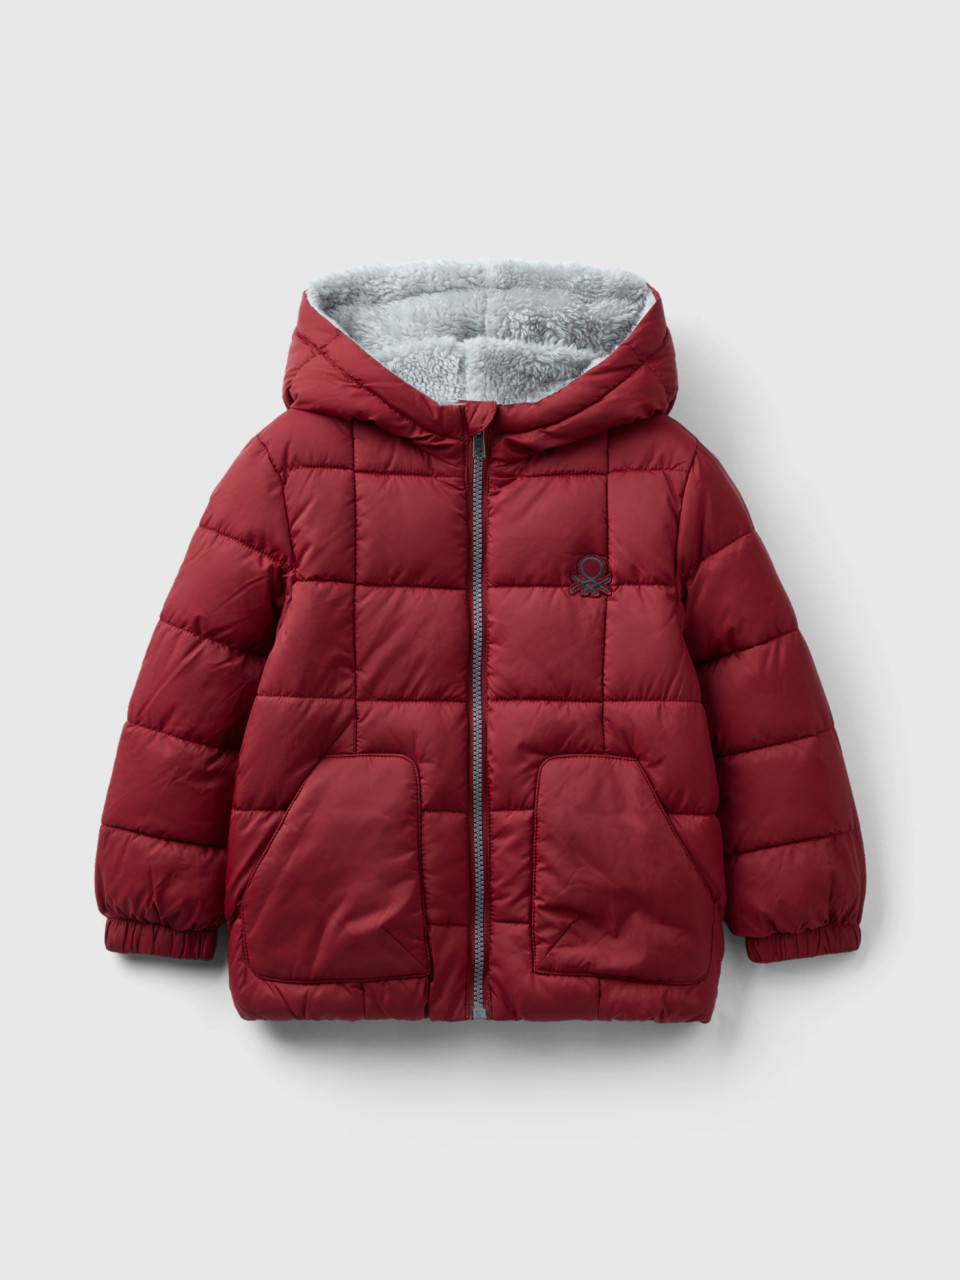 Benetton, Jacket With Teddy Interior, Red, Kids